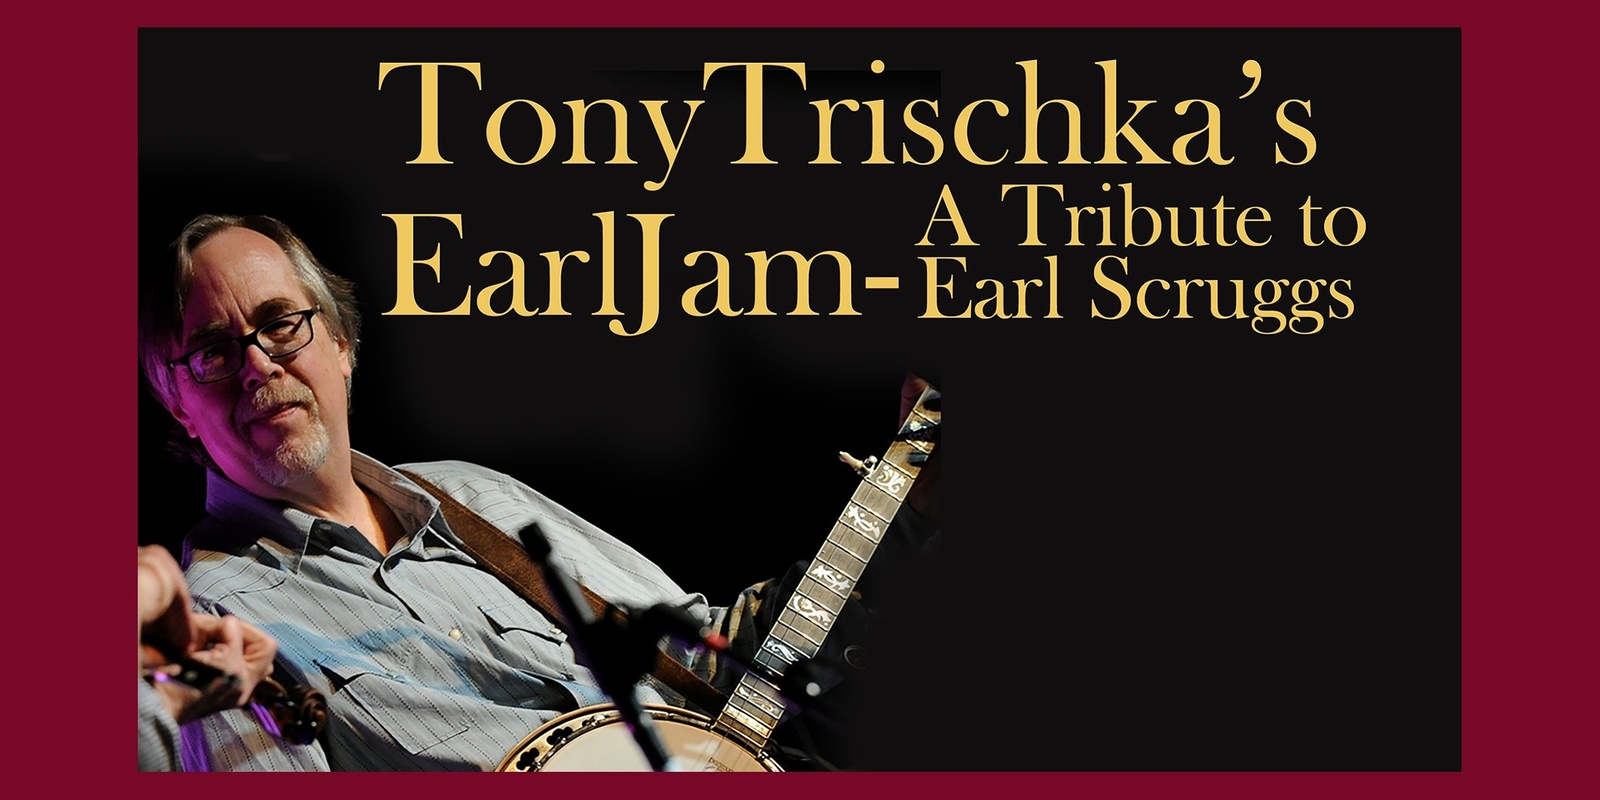 Banner image for Tony Trischka's EarlJam - A Tribute to Earl Scruggs